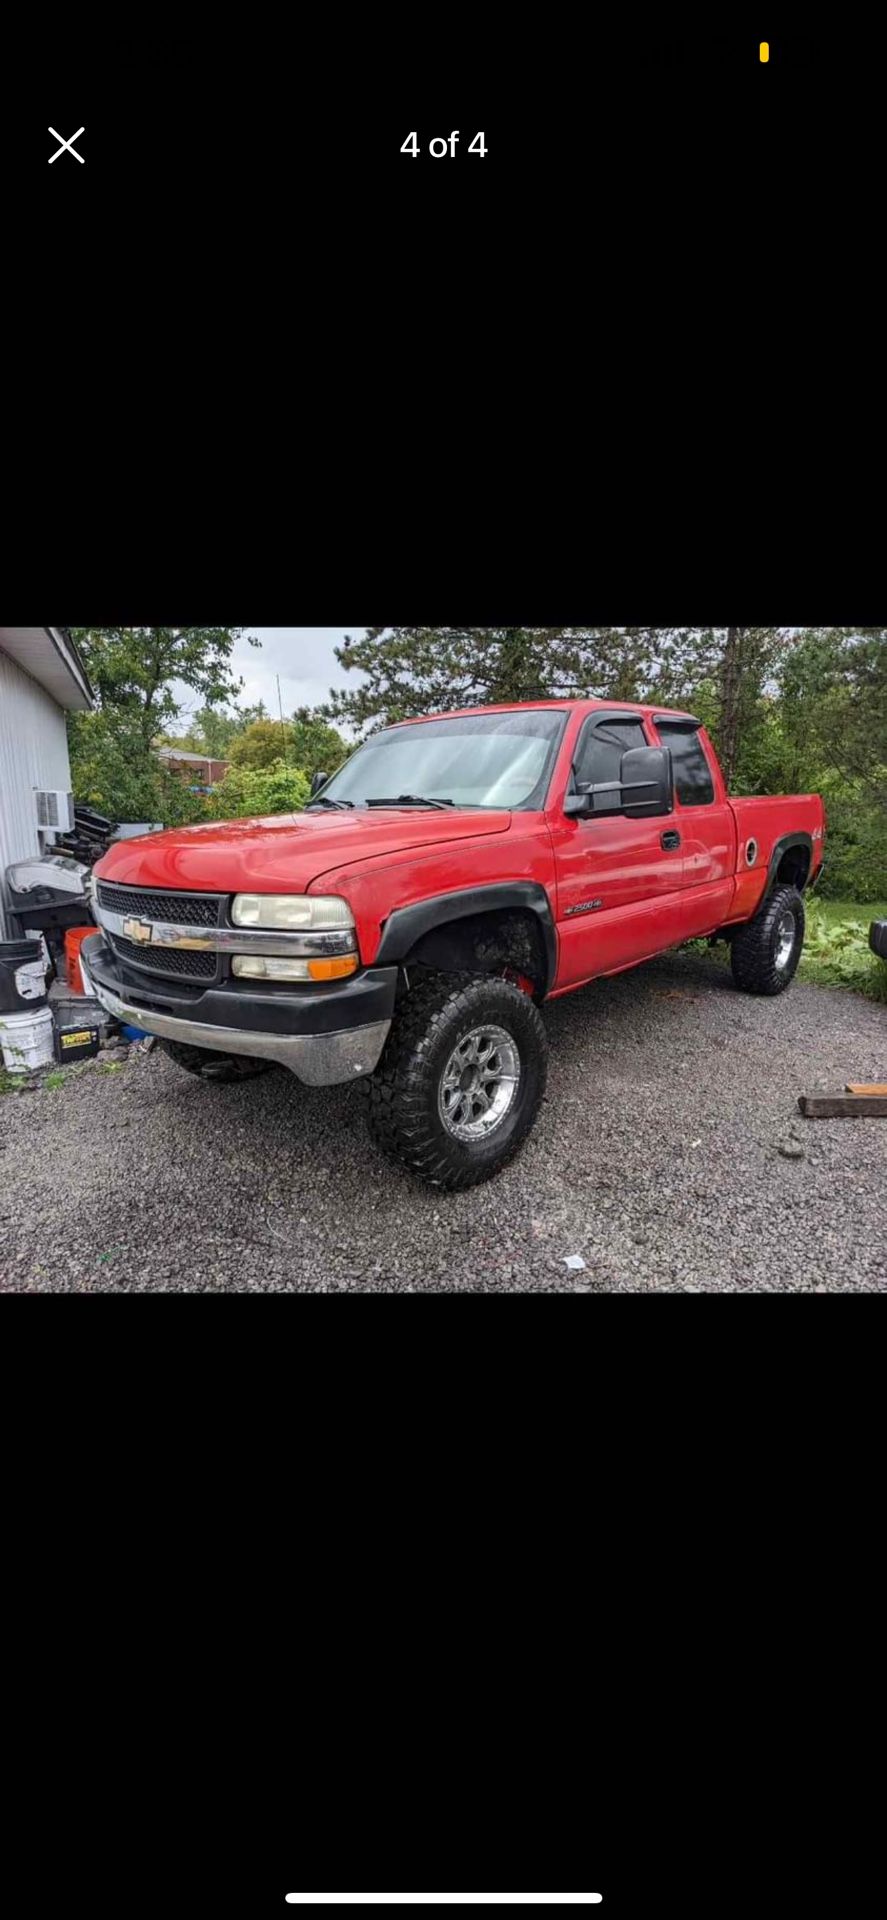 2001 01 Chevy 2500 Has 6”. Life The Air Shocks On The Rear Brand New Mud Tires 